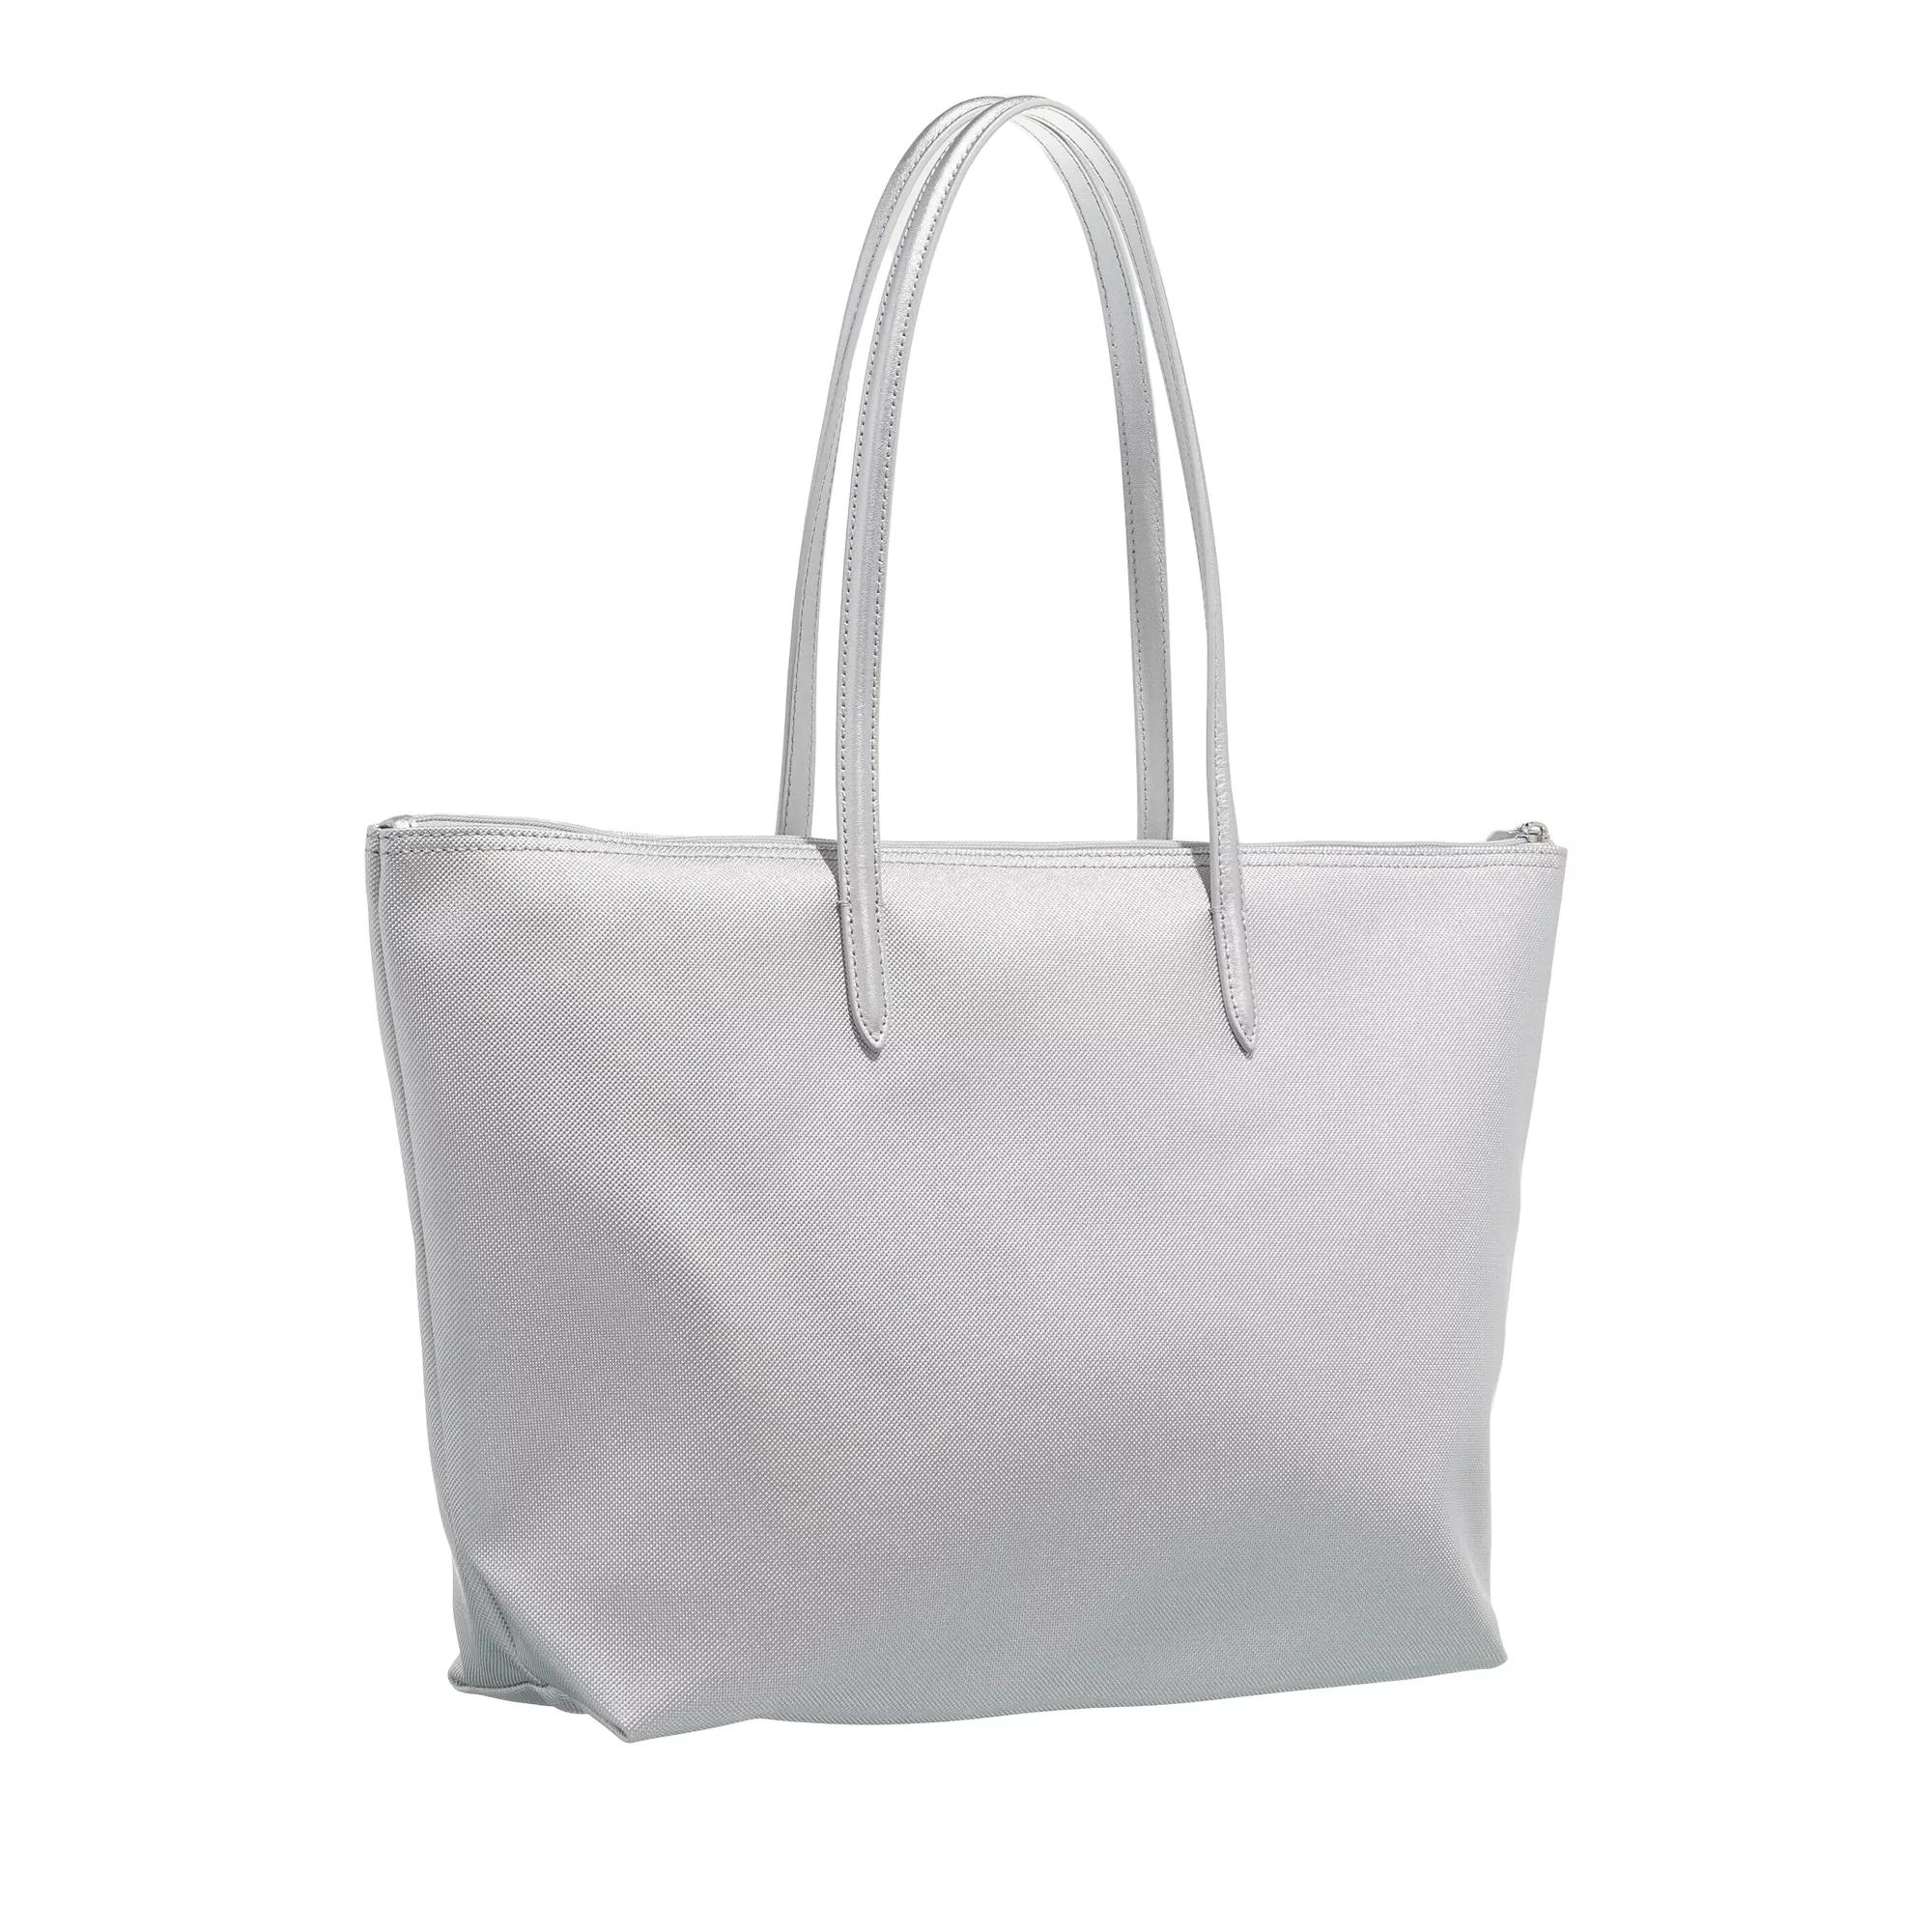 Lacoste Shoppers L Shopping Bag in zilver